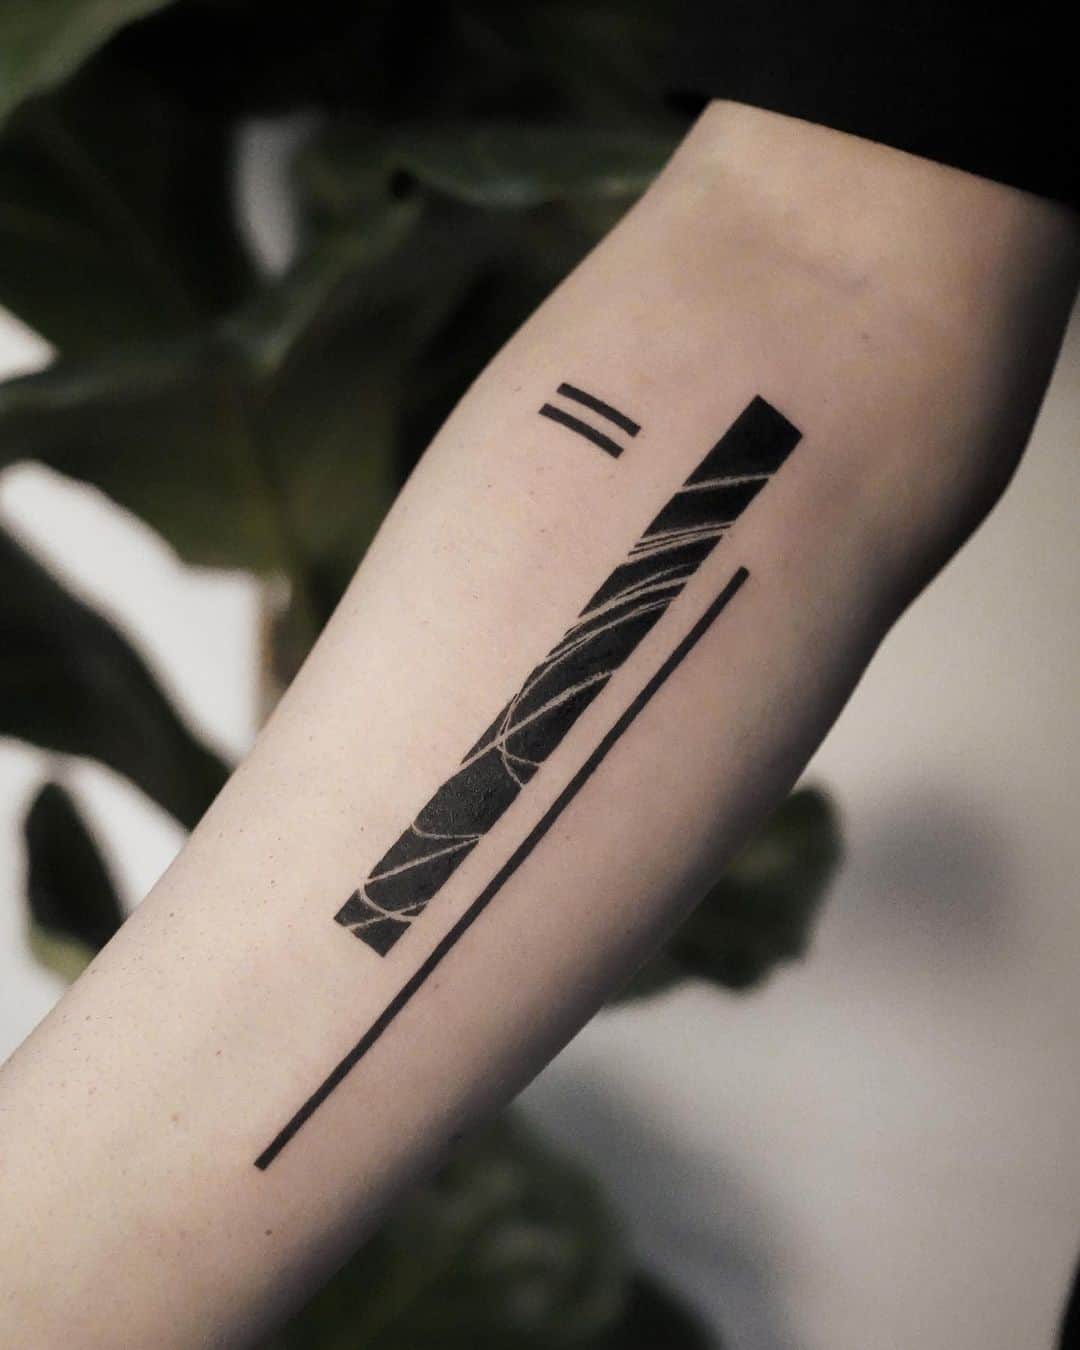 Abstract tattoo on arm by jamjam.tattoo